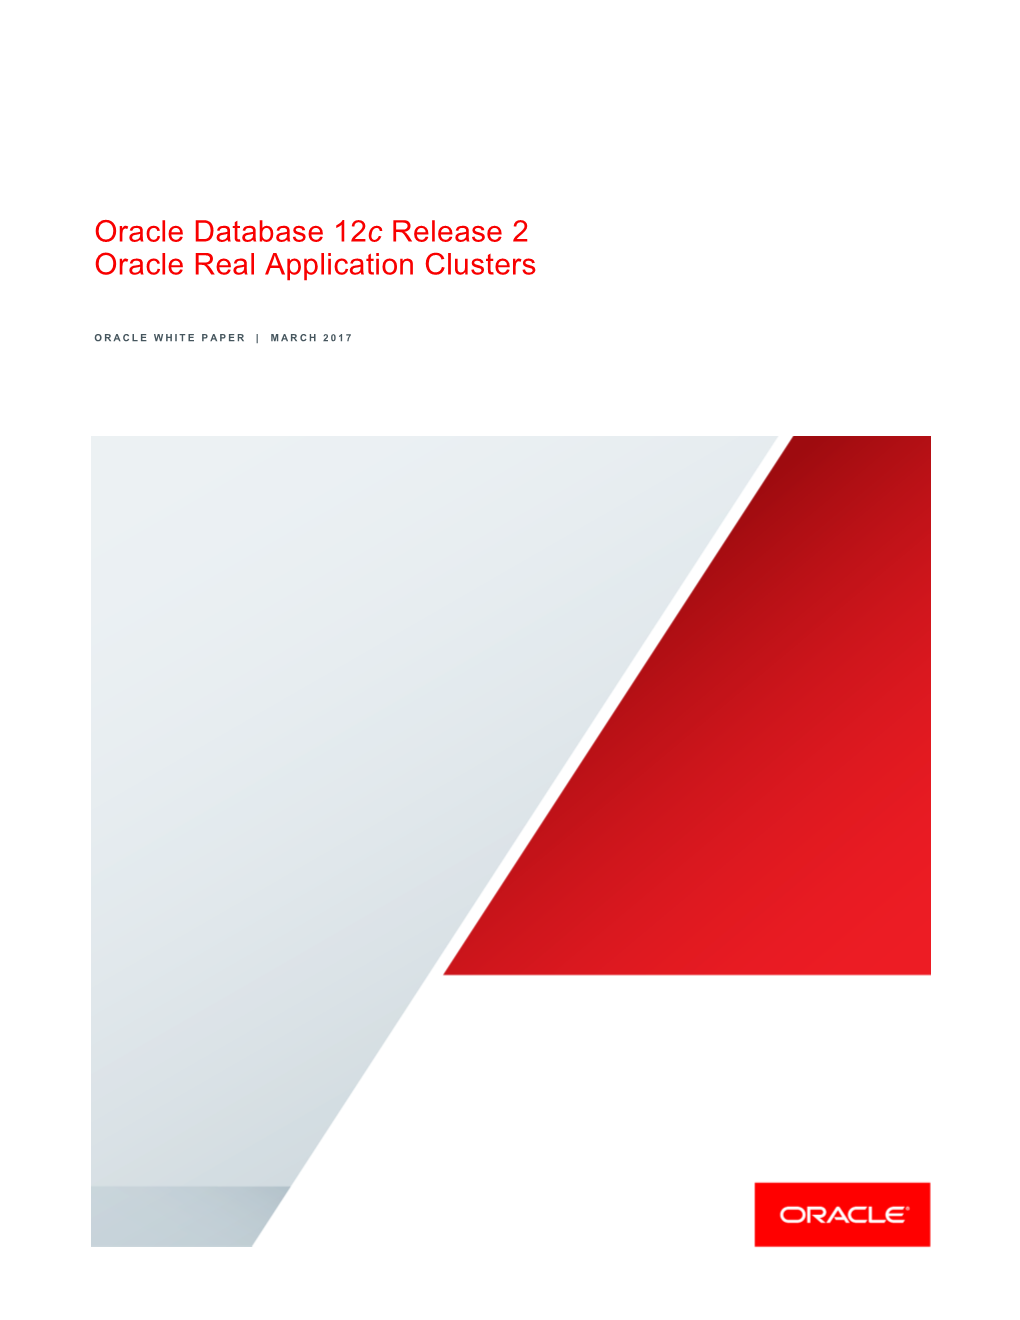 Oracle Database 12C Release 2, Oracle Real Application Clusters